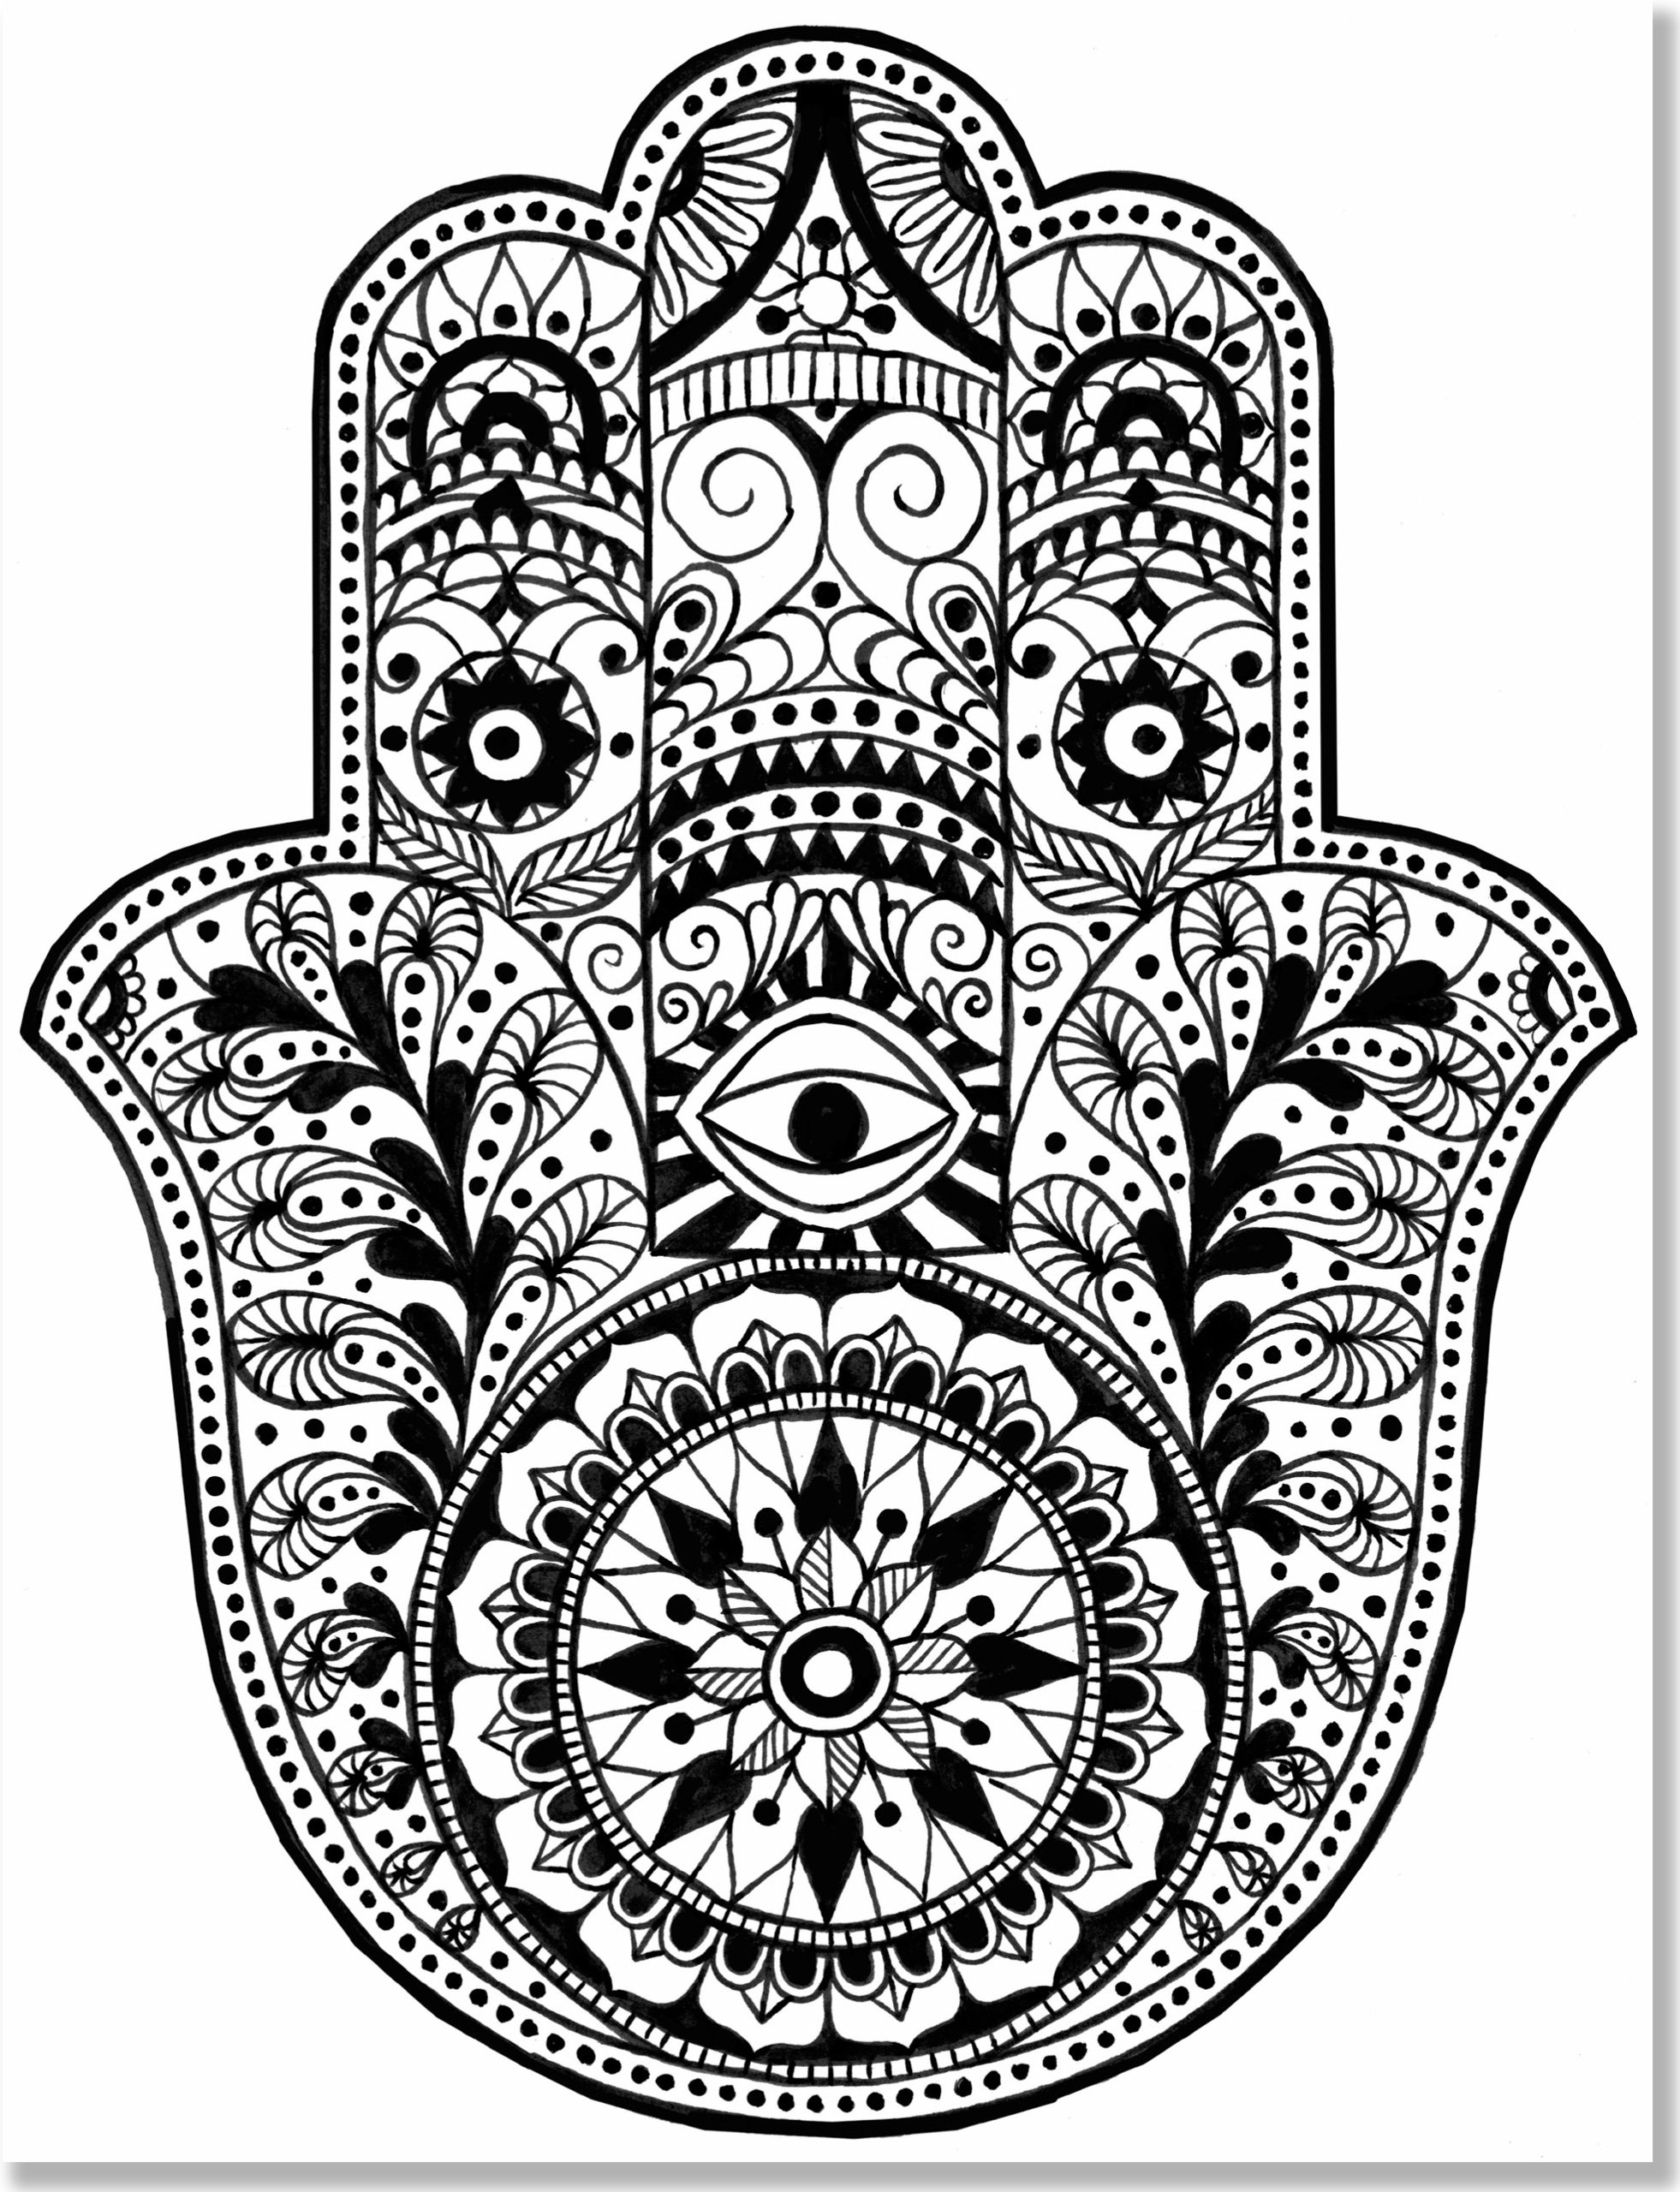 Mandala Coloring Pages For Adults Coloring Ideas Fabulous Mandala Coloring Sheets For Adults